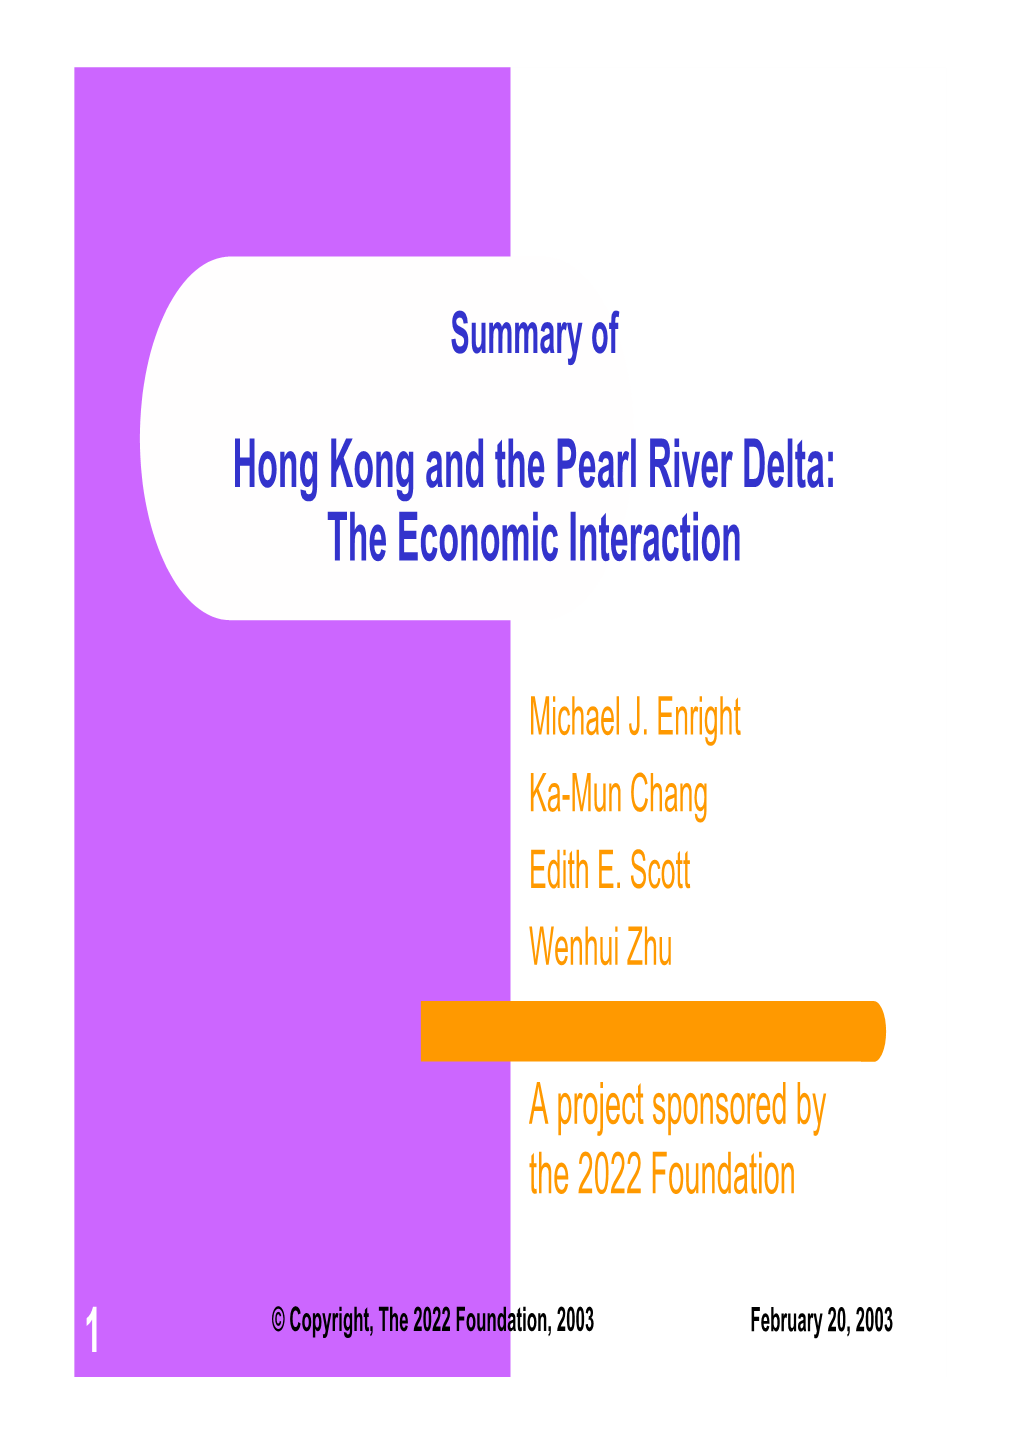 Hong Kong and the Pearl River Delta: the Economic Interaction